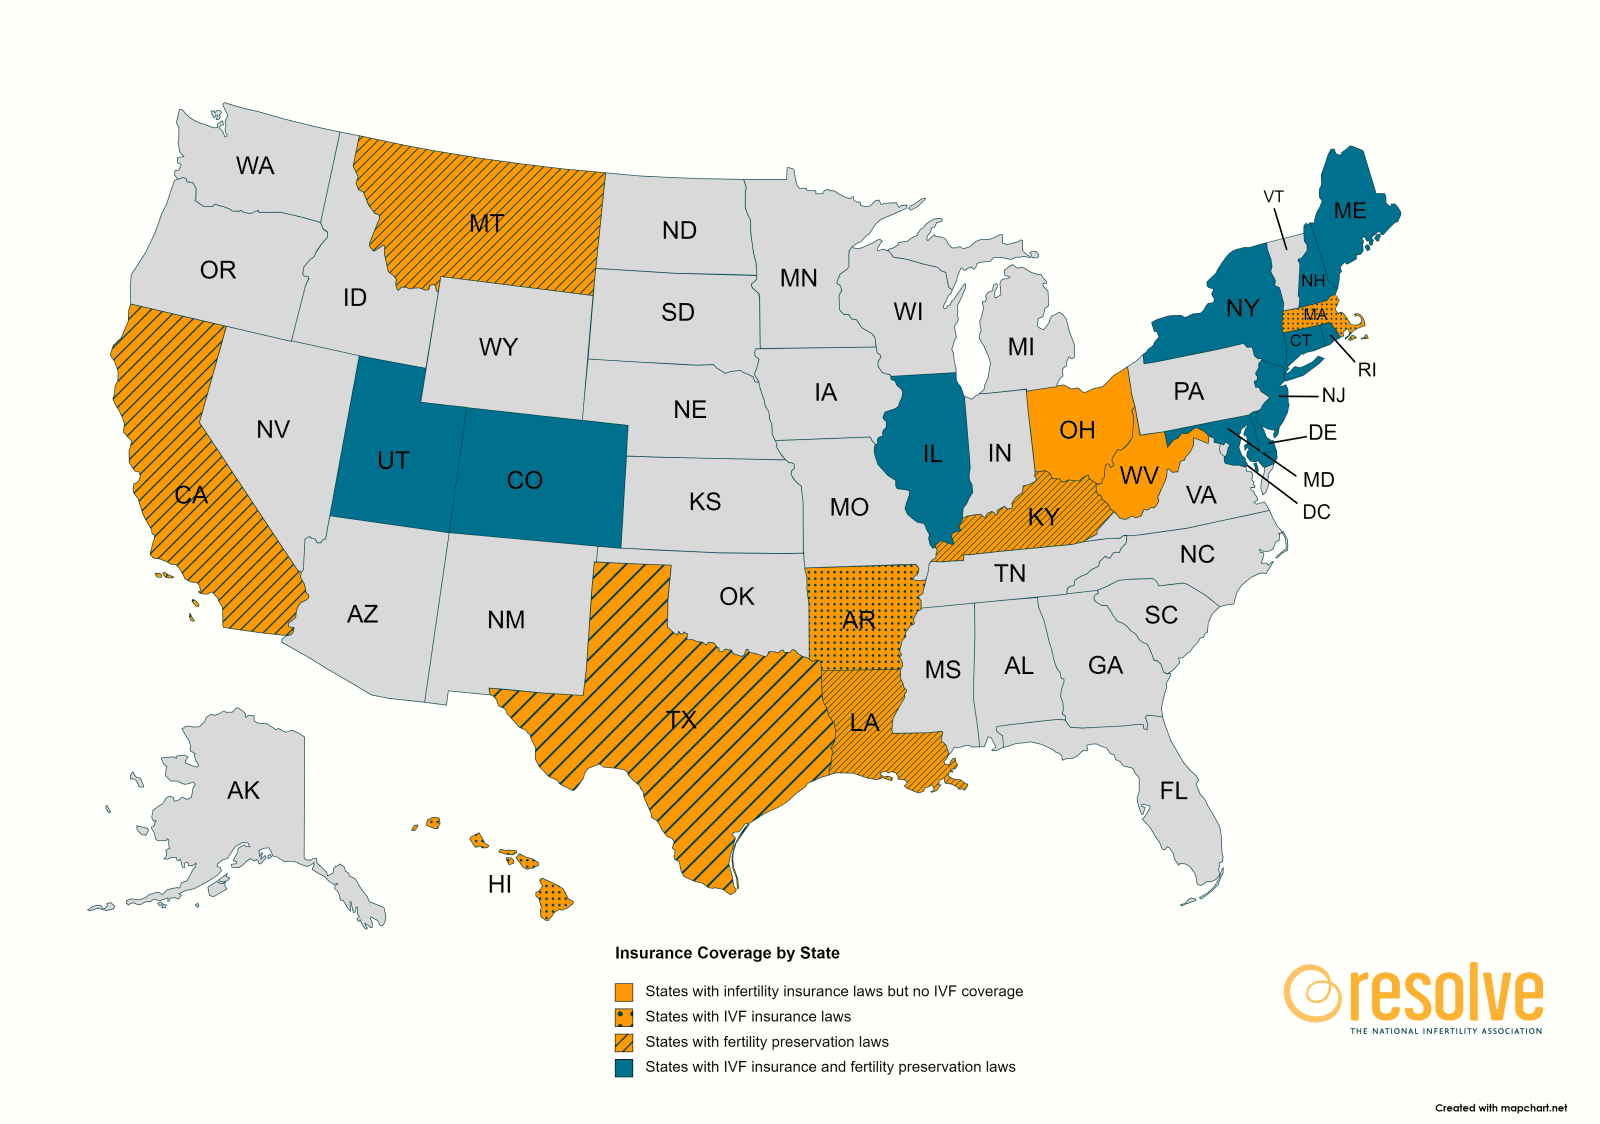 Insurance Coverage by State